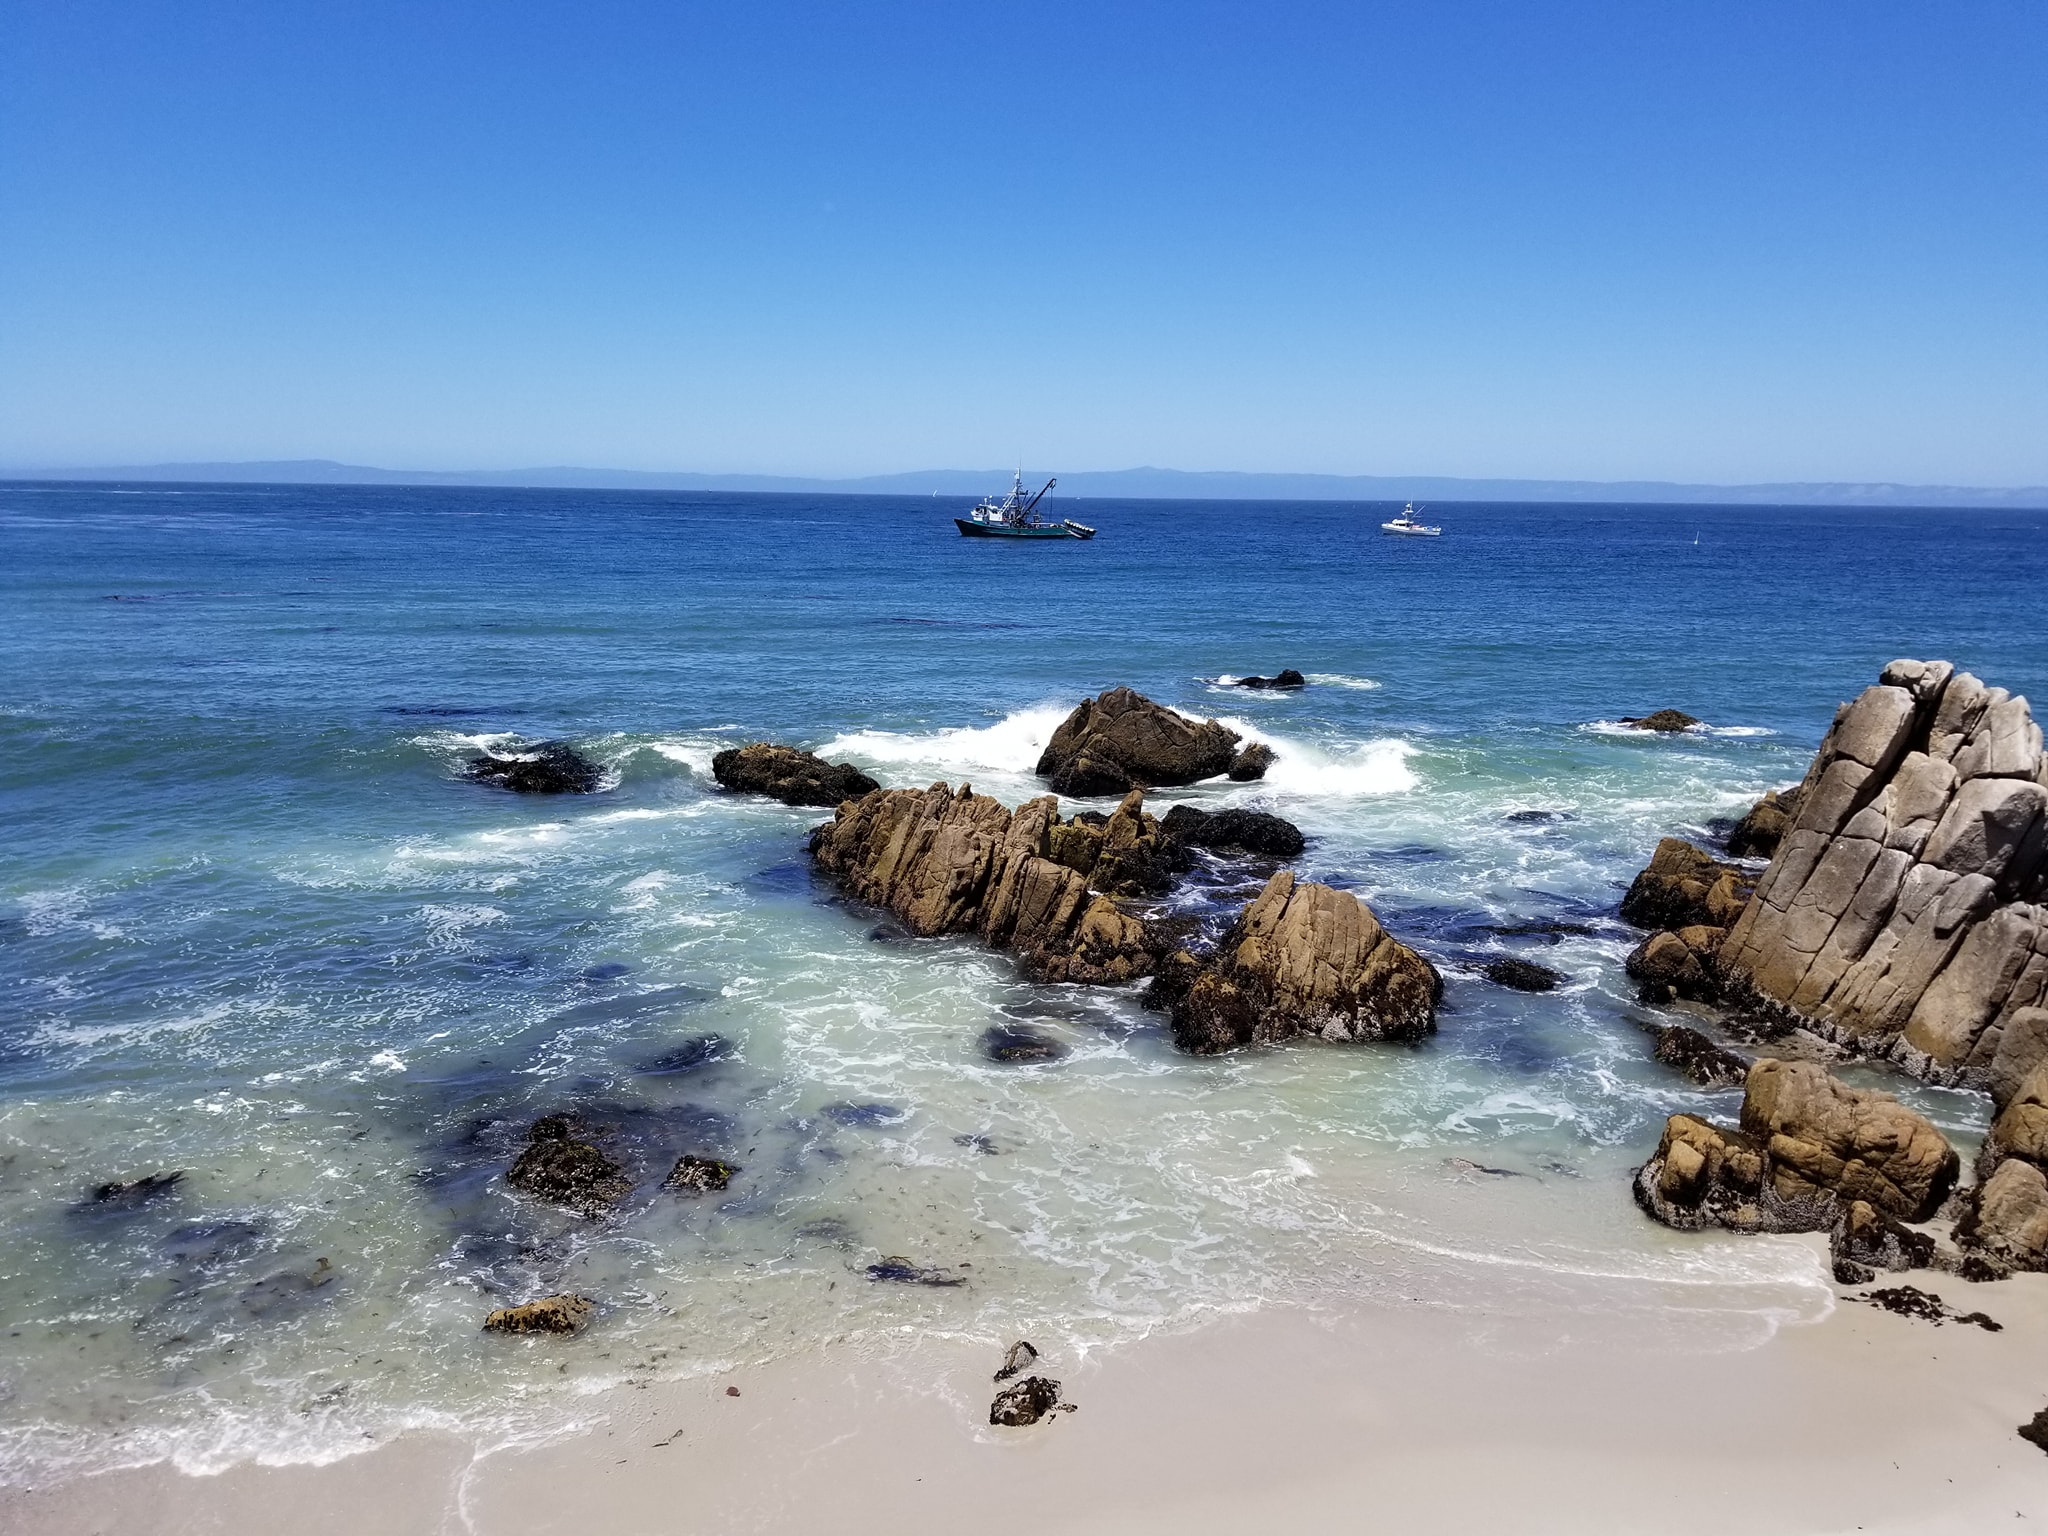 view of the monterey bay. there are rocks where the sea meets the shore and two boats on the water in the distance.